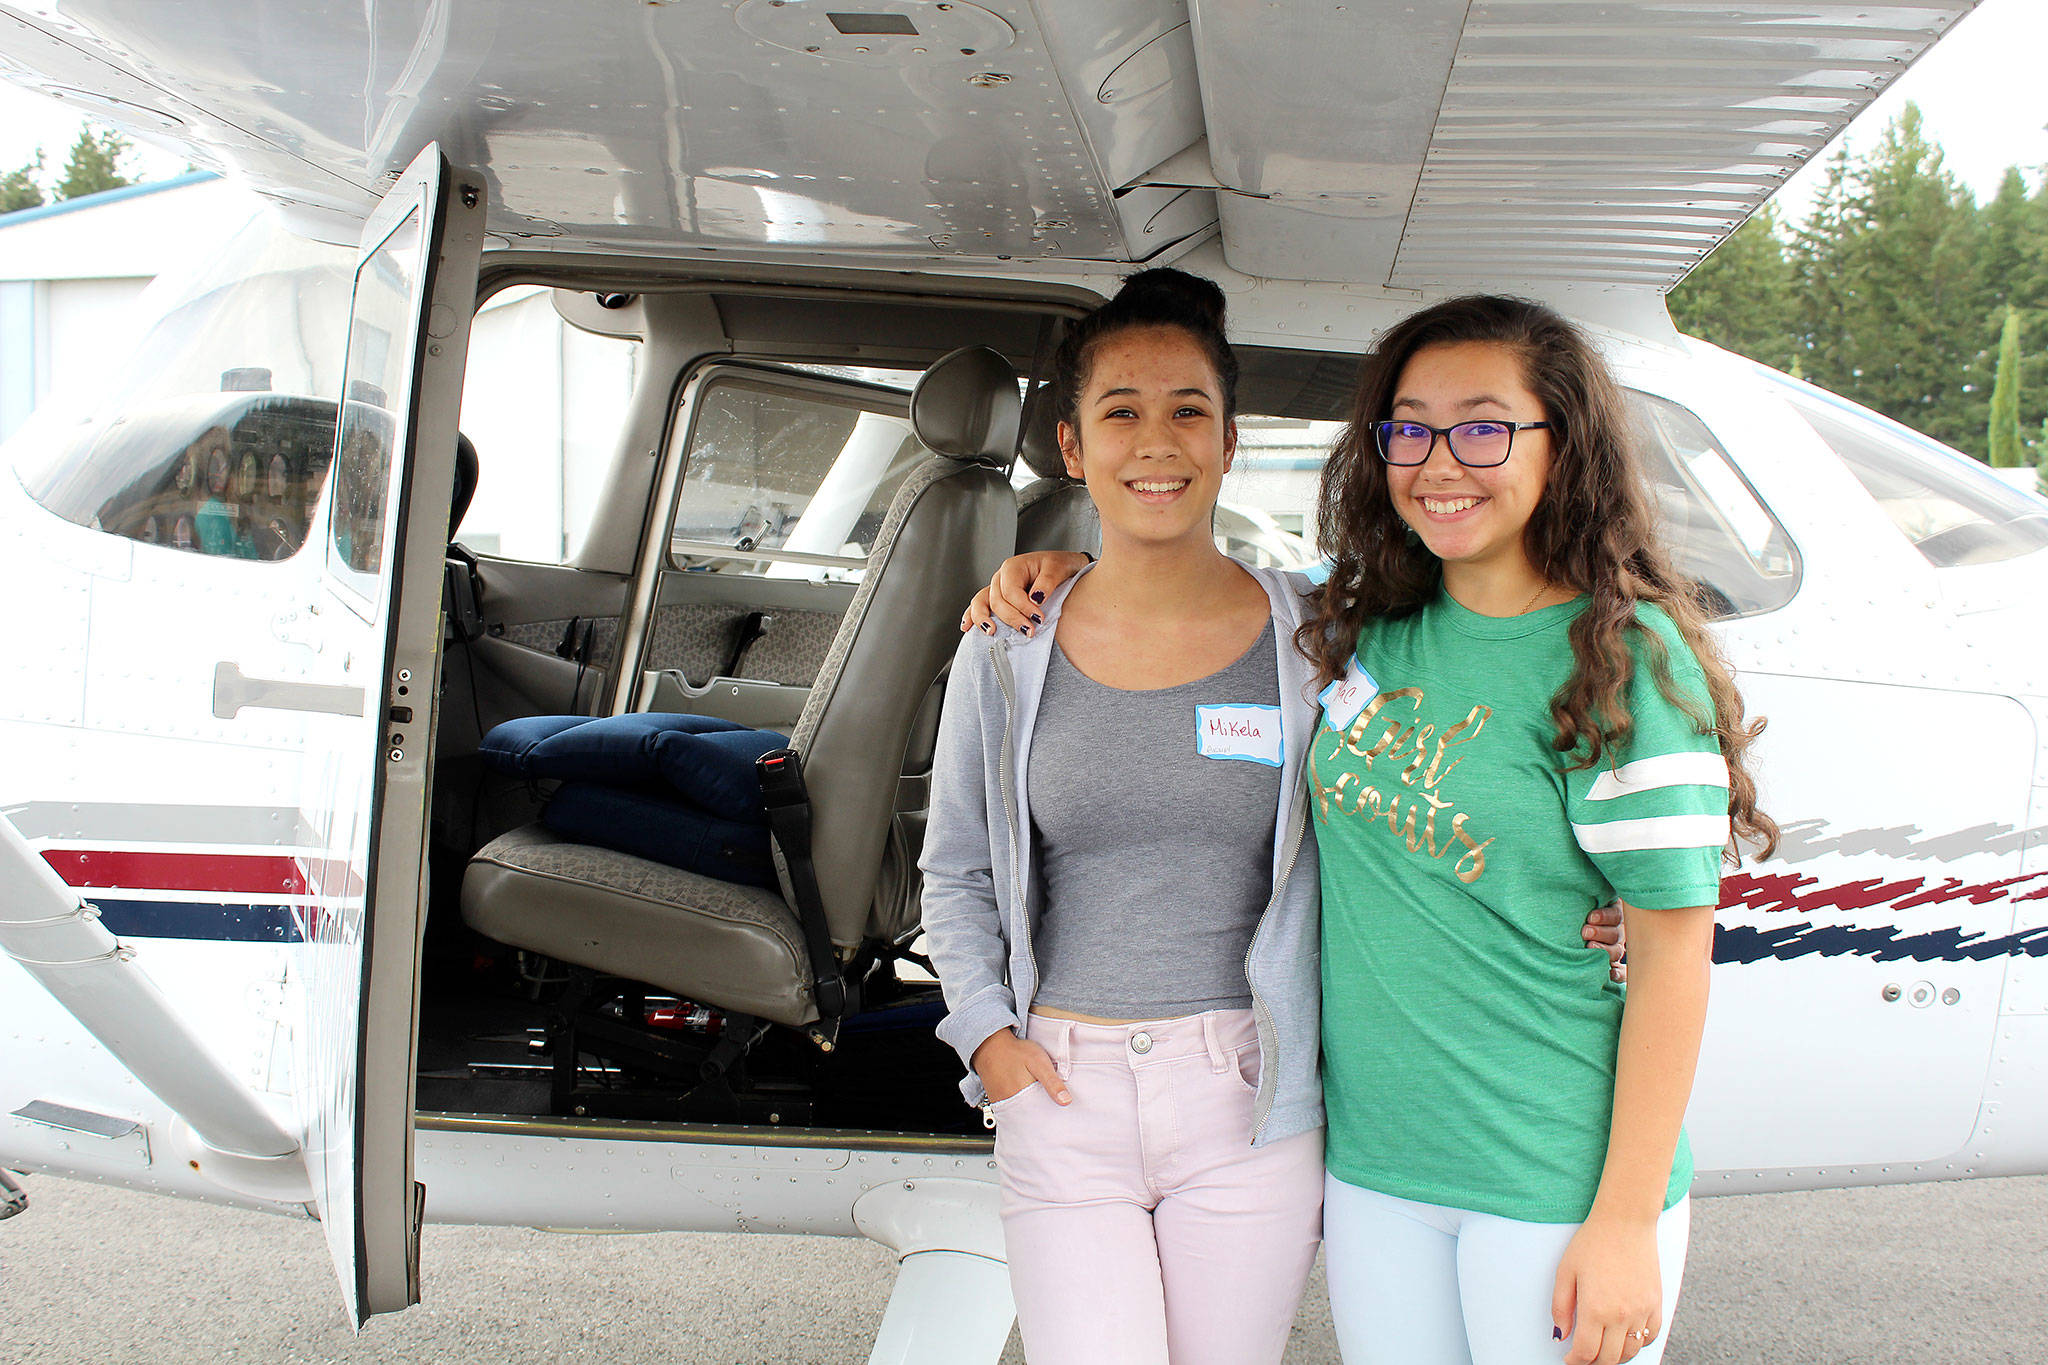 Mikela Arnall, 14, and Kayla Cortes, 15, had the opportunity to fly a plane Aug. 24 above the Bremerton Airport.                                Michelle Beahm / Kitsap News Group